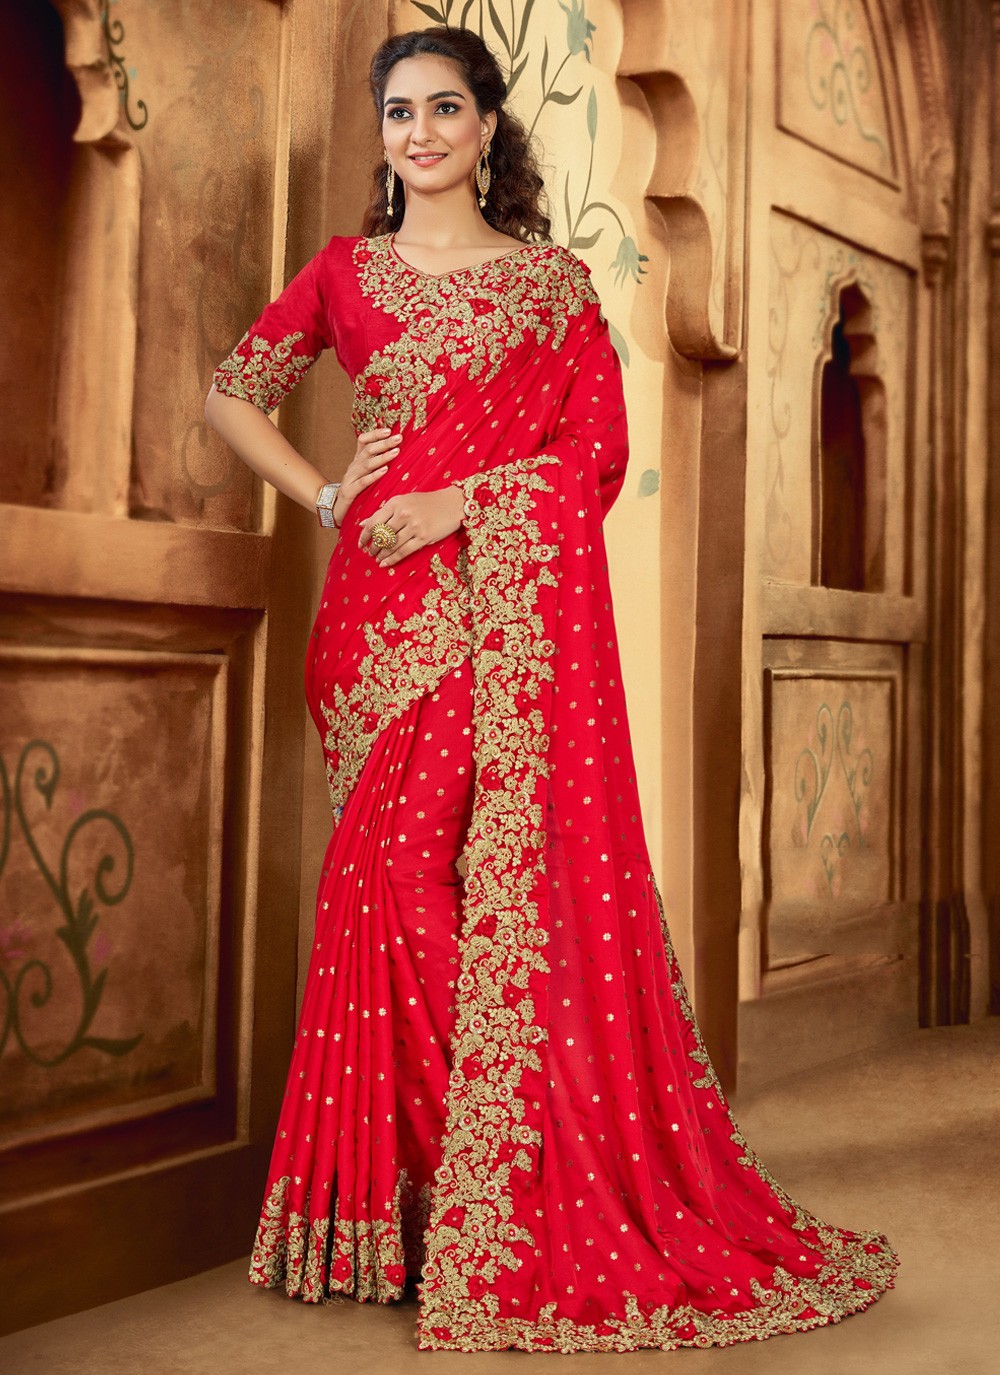 Top more than 90 red modern saree latest